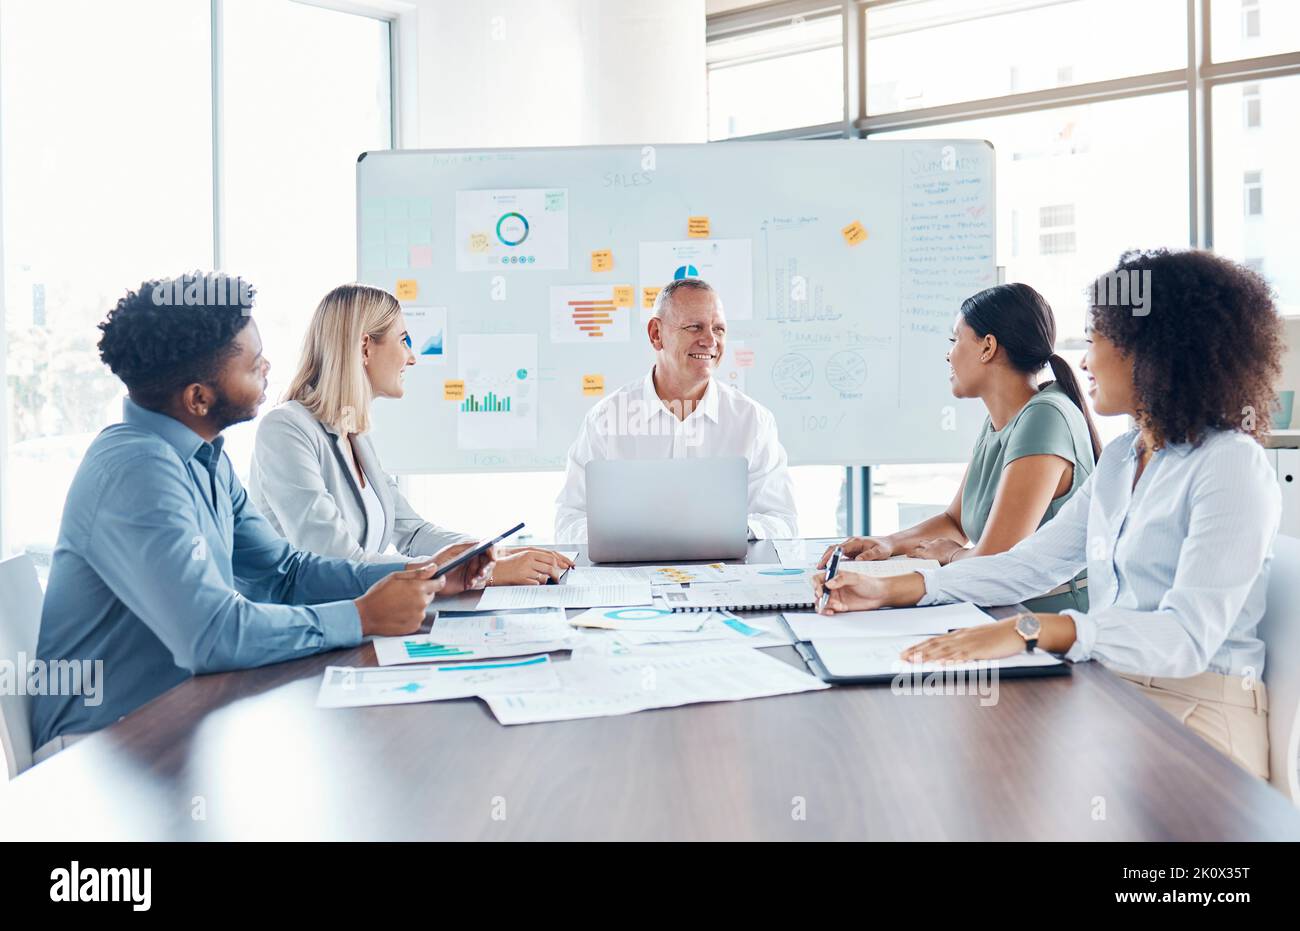 Planning, thinking and strategy by team collaboration on financial analysis in a corporate office. Happy business people smiling and looking positive Stock Photo